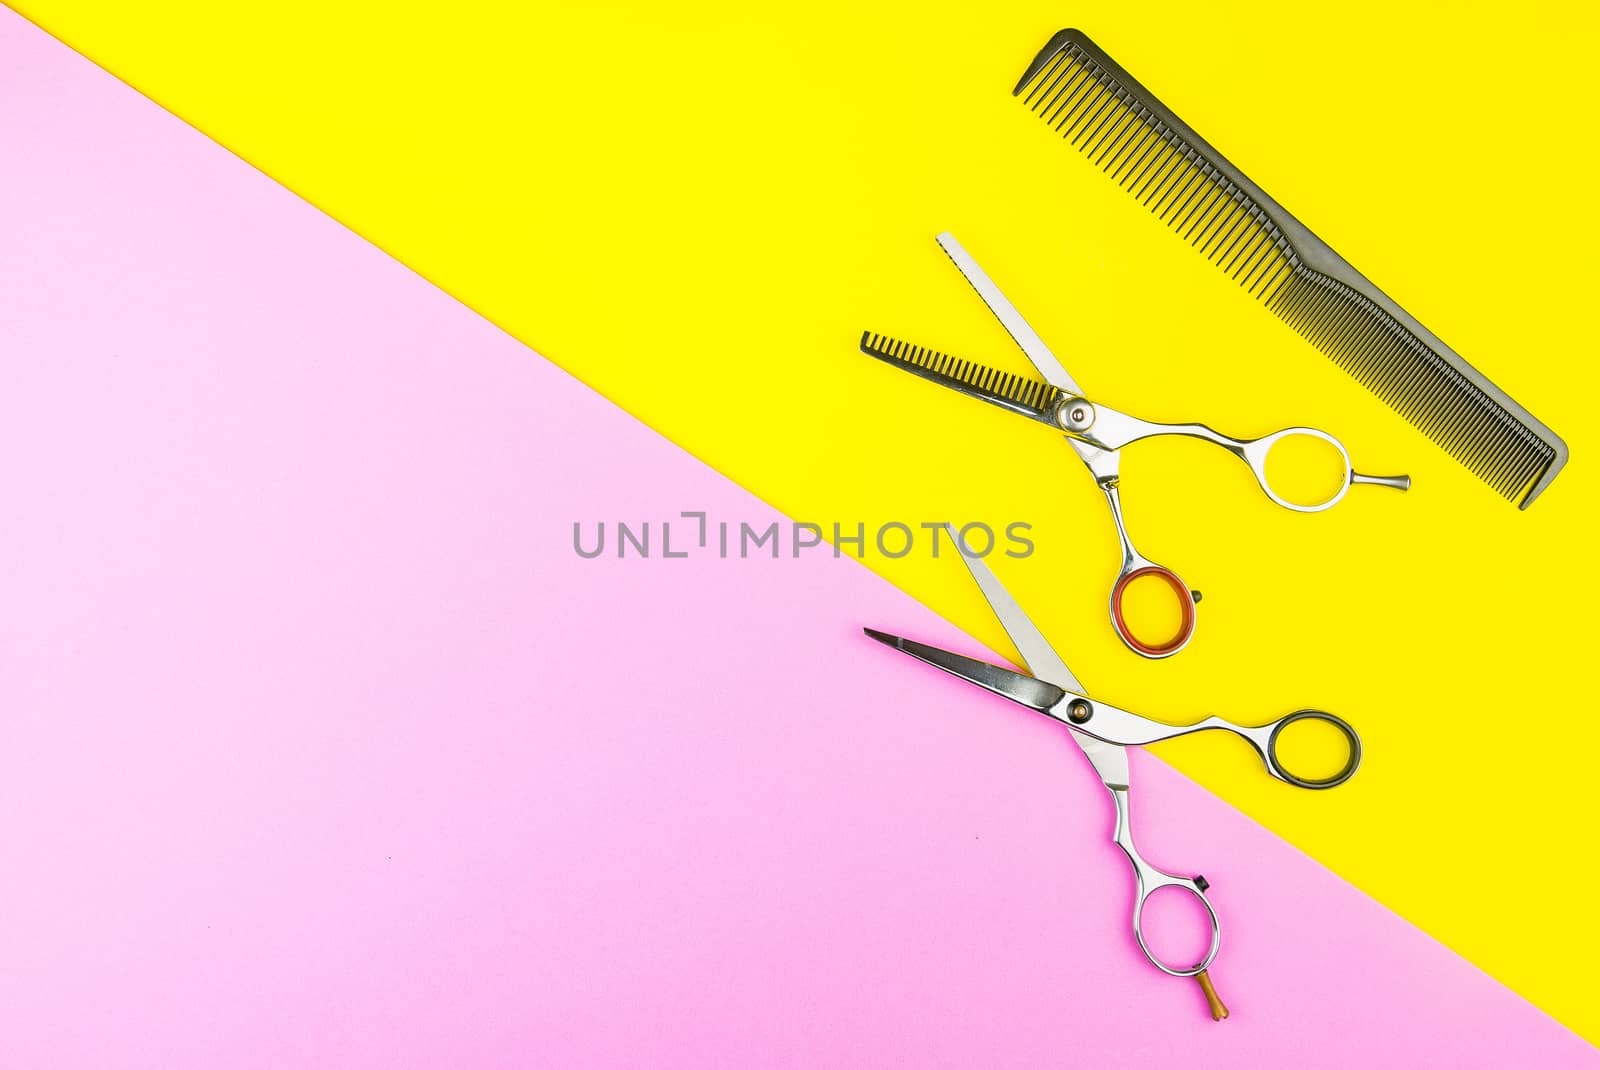 Stylish Professional Barber Scissors and comb on yellow and pink background. Hairdresser salon concept, Hairdressing Set. Haircut accessories. Copy space image, flat lay